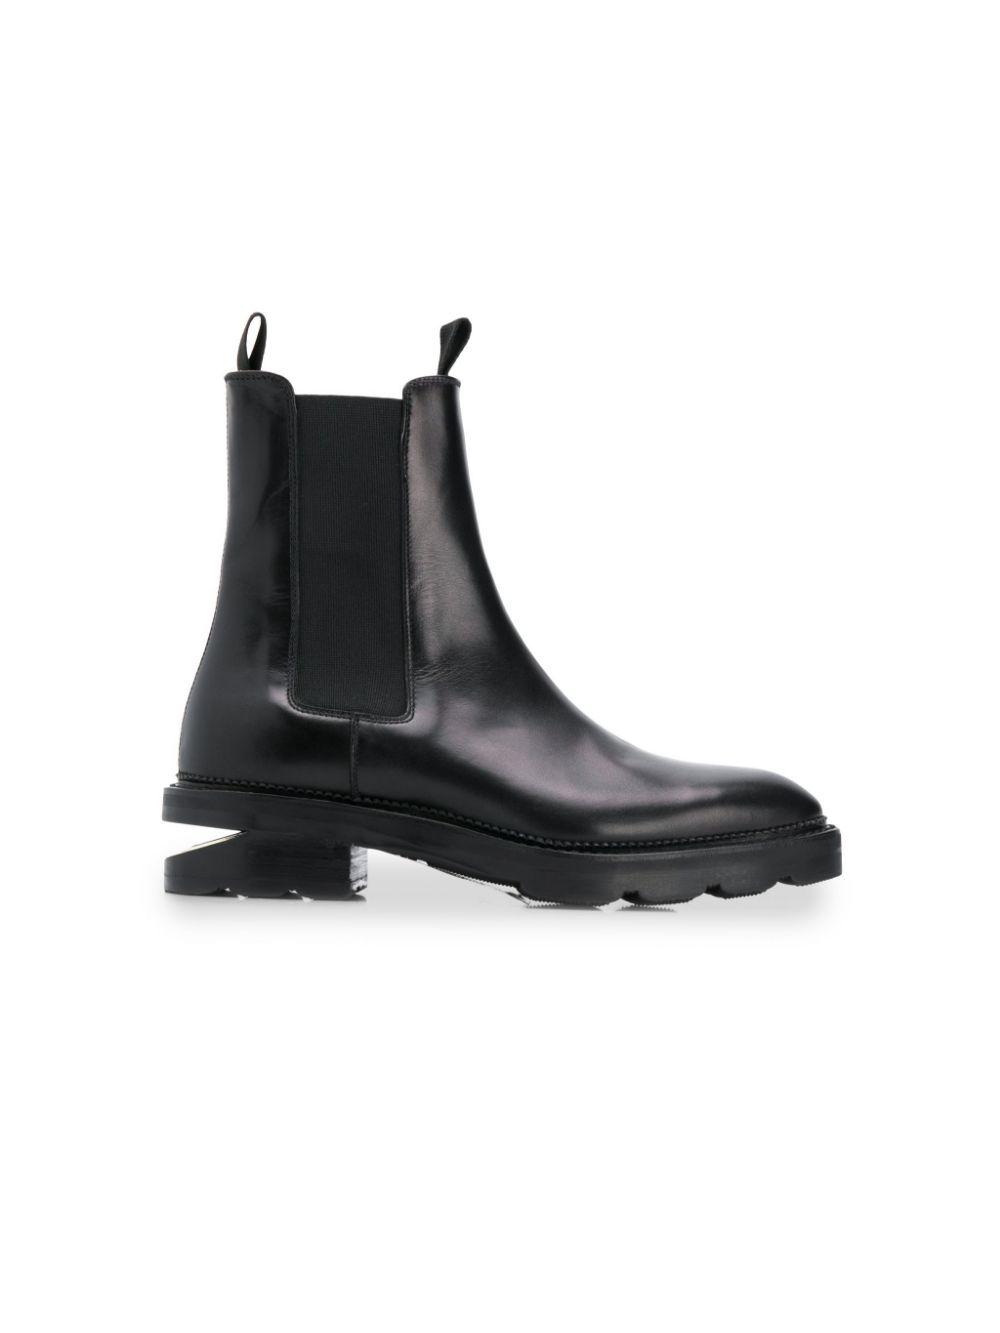 Alexander Wang Leather Andy Chelsea Boots in Black - Lyst